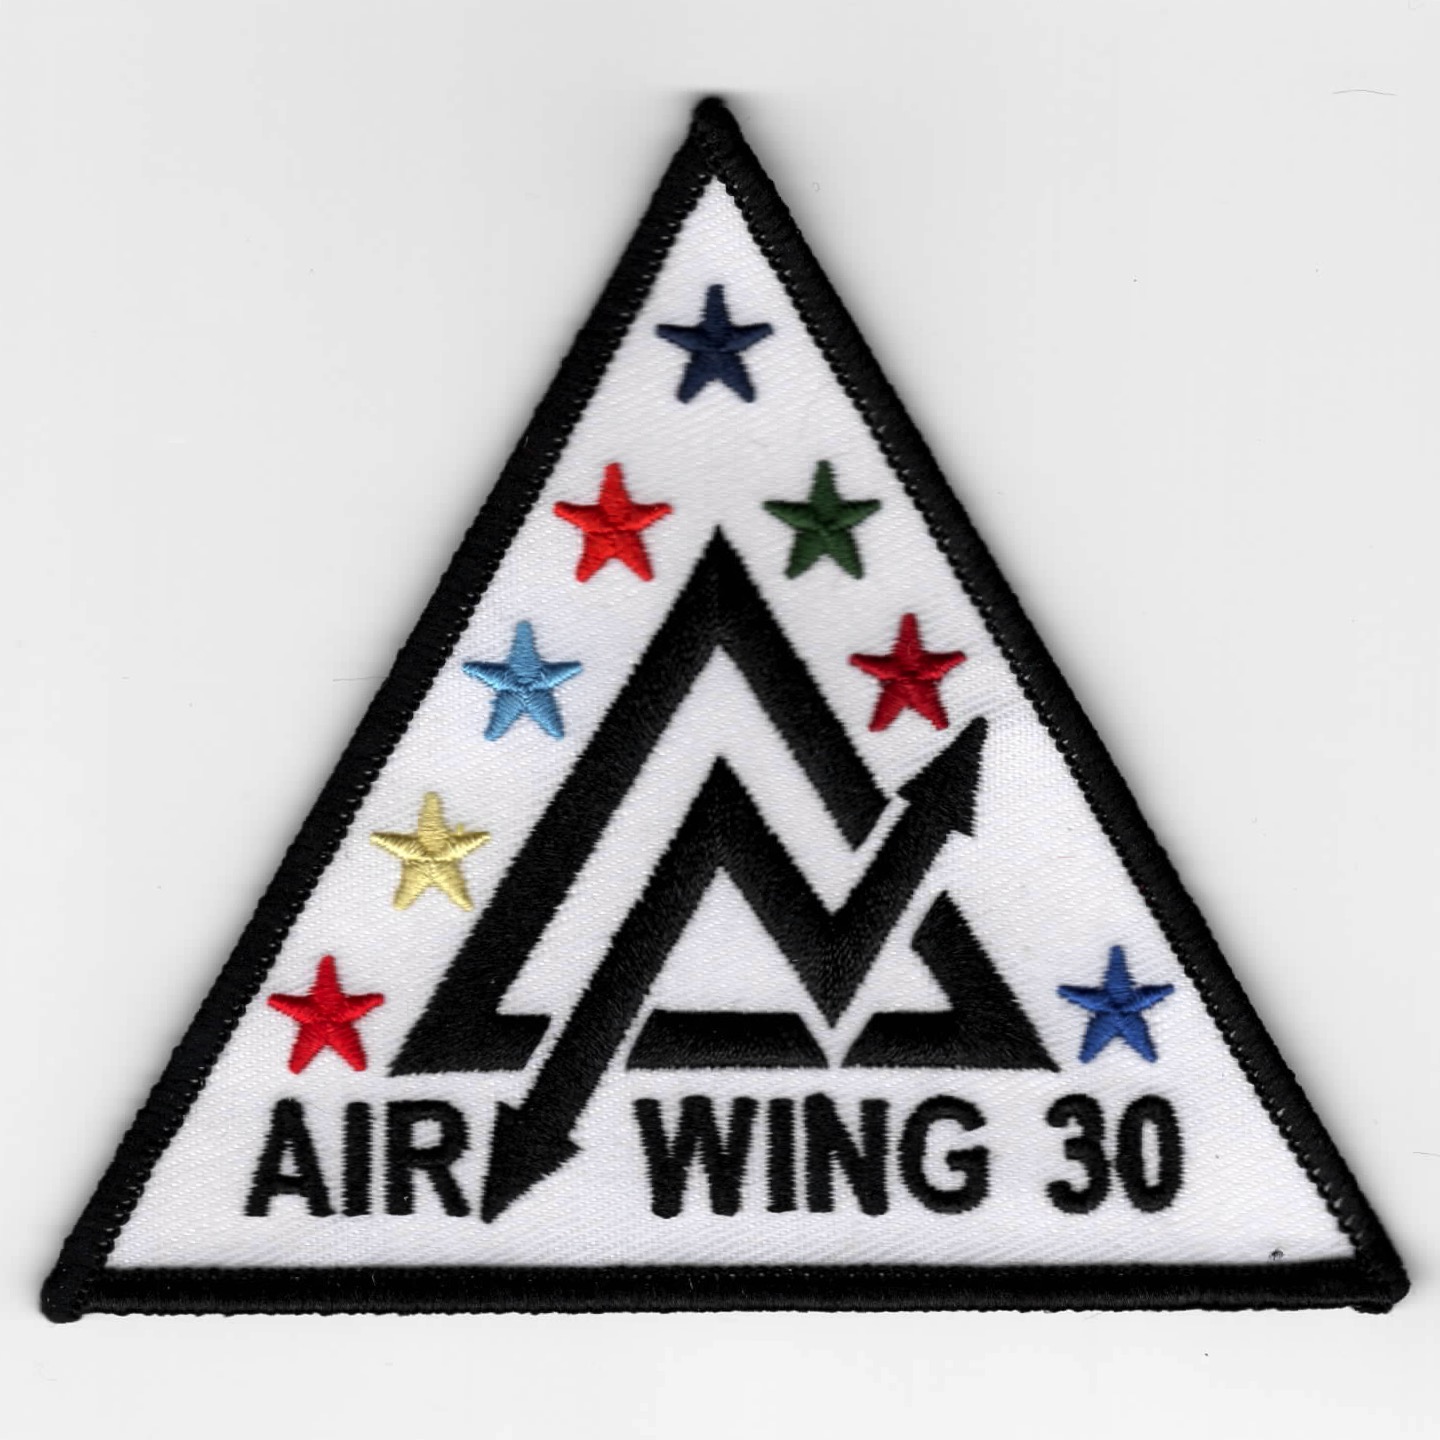 Airwing 30 Patches!